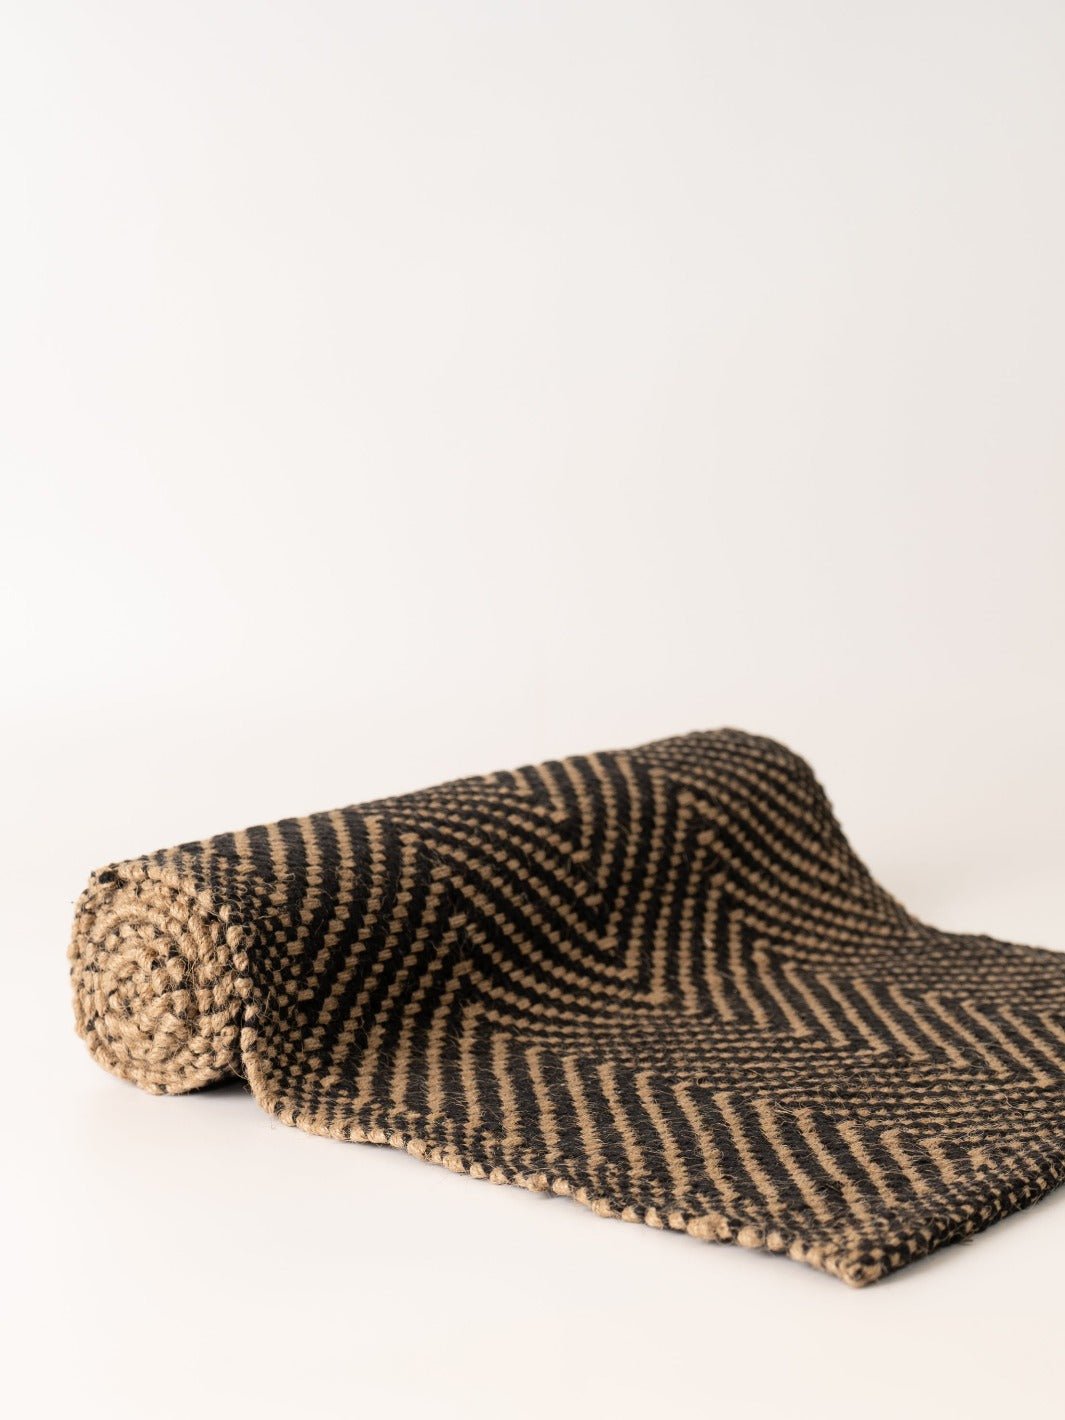 Woven Jute and Cotton Table Runner - Heyday